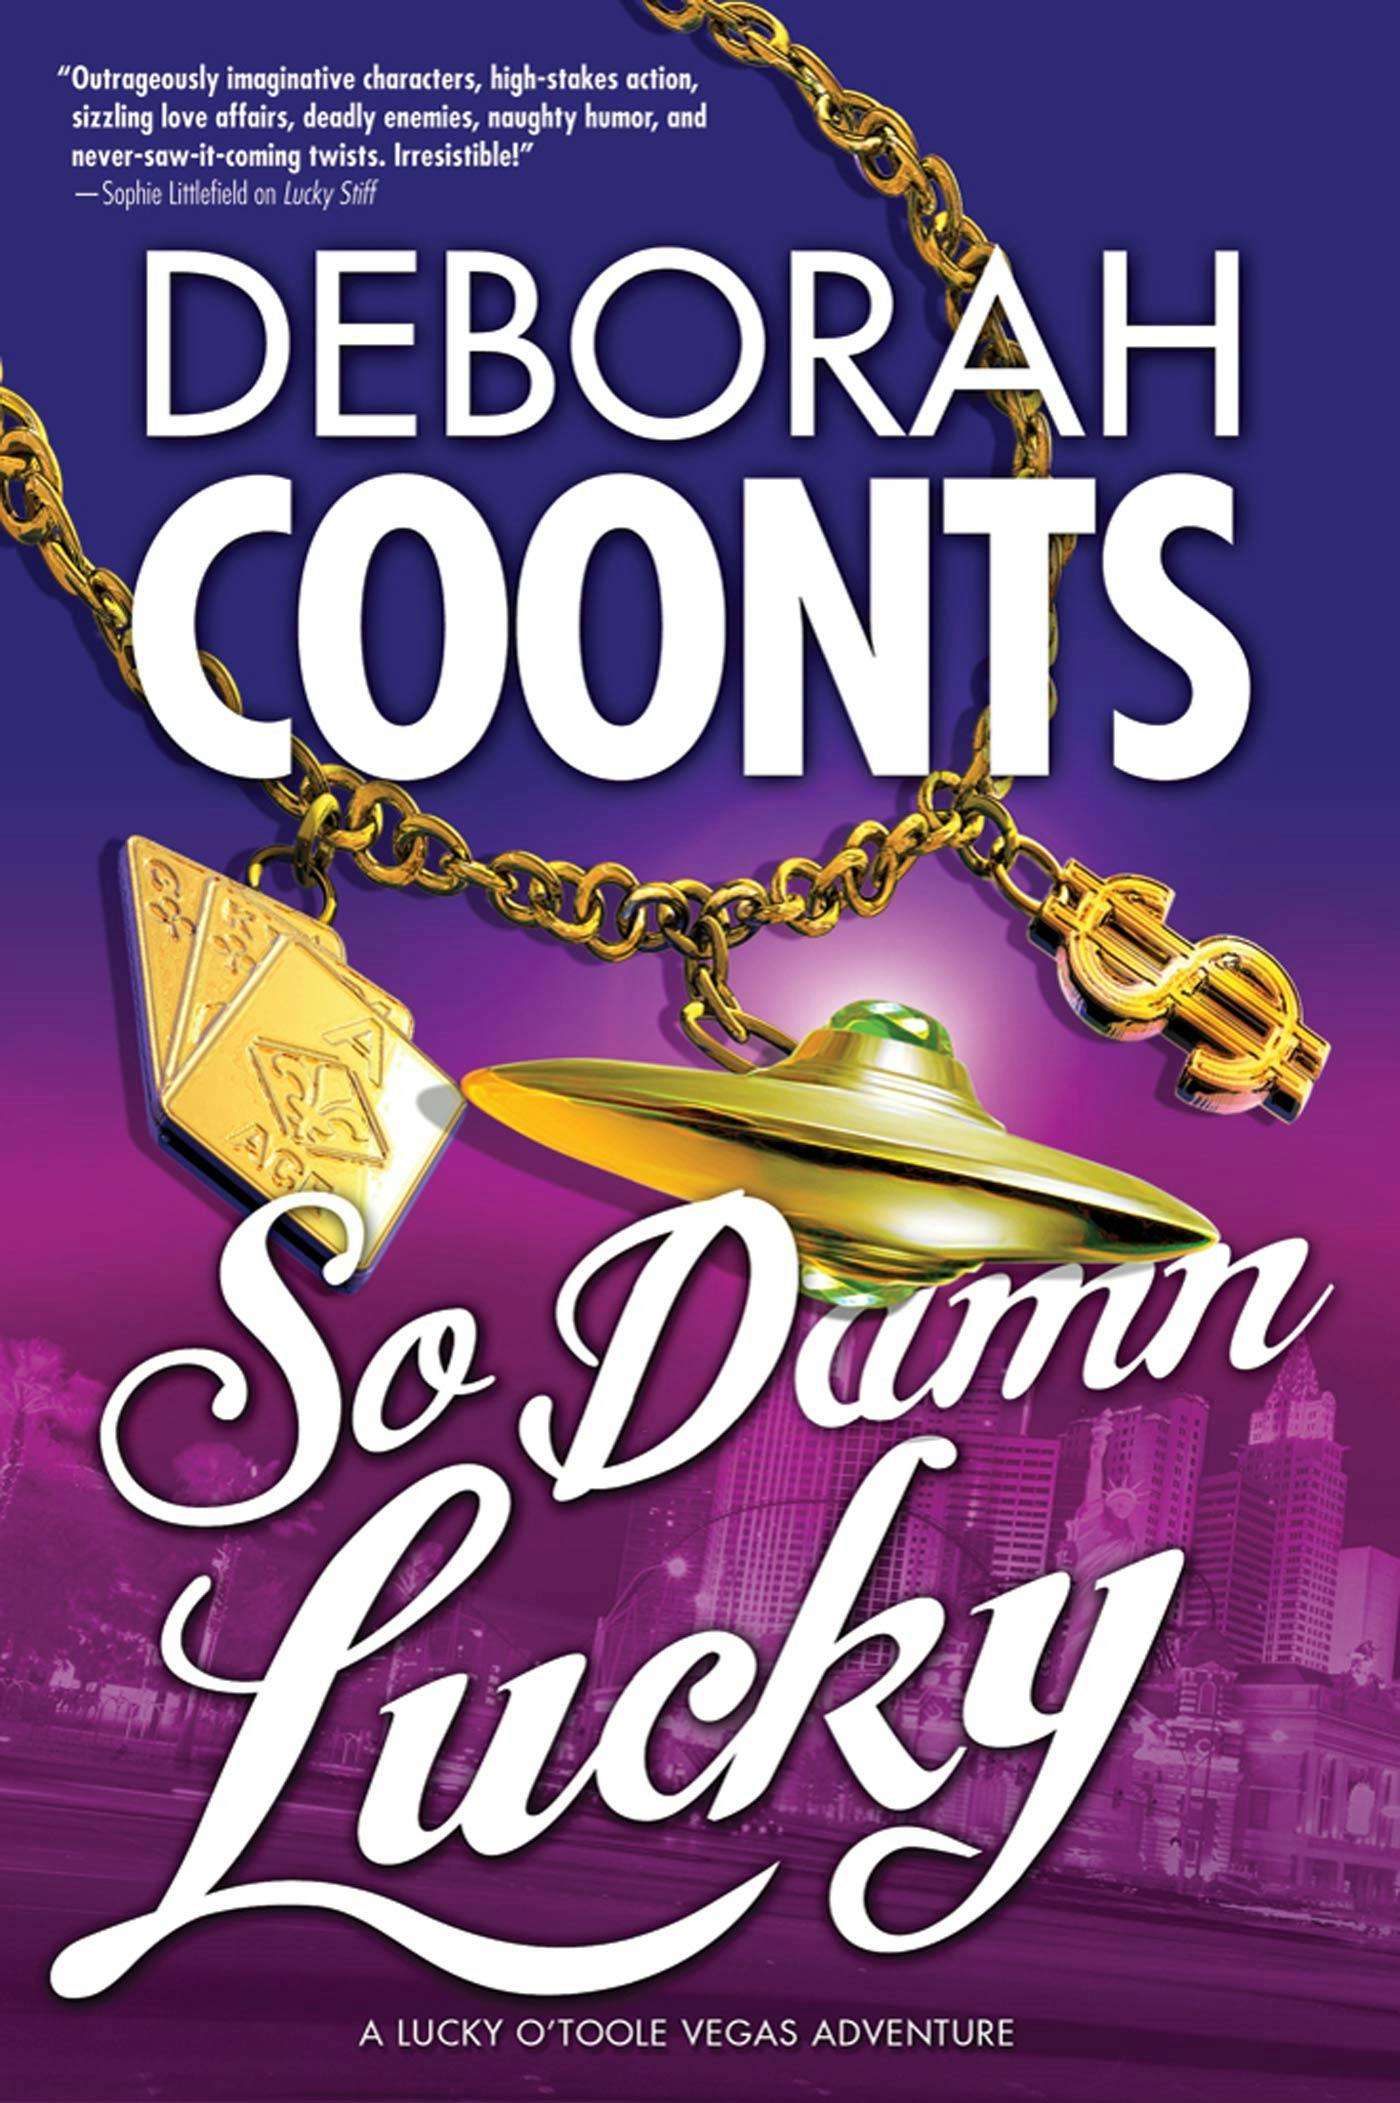 Cover for the book titled as: So Damn Lucky